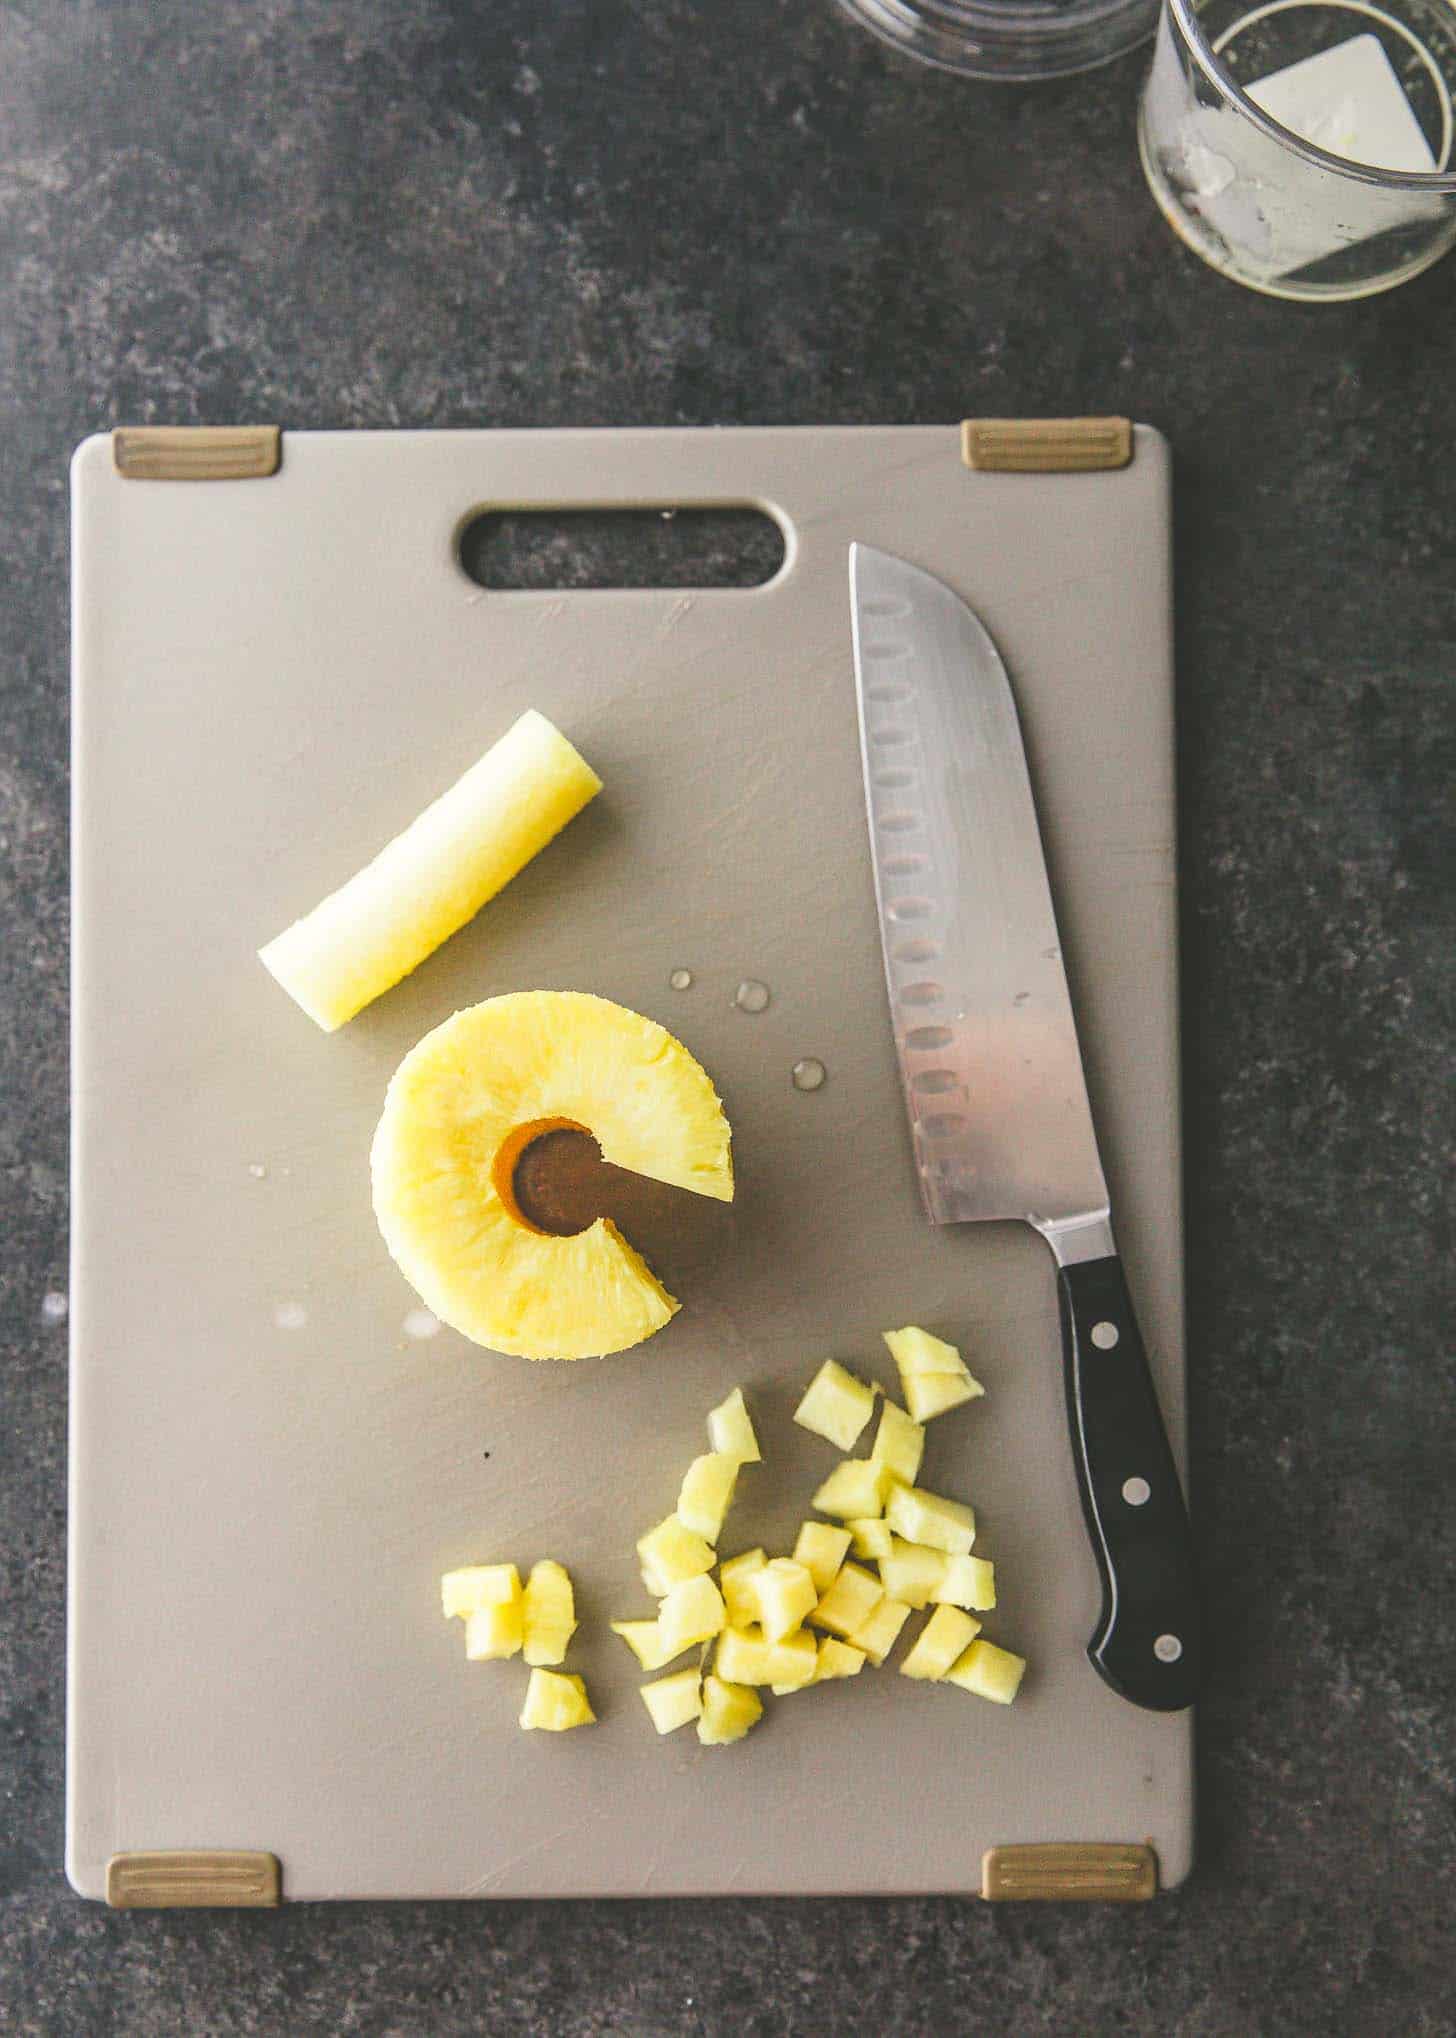 slicing pineapple on a cutting board